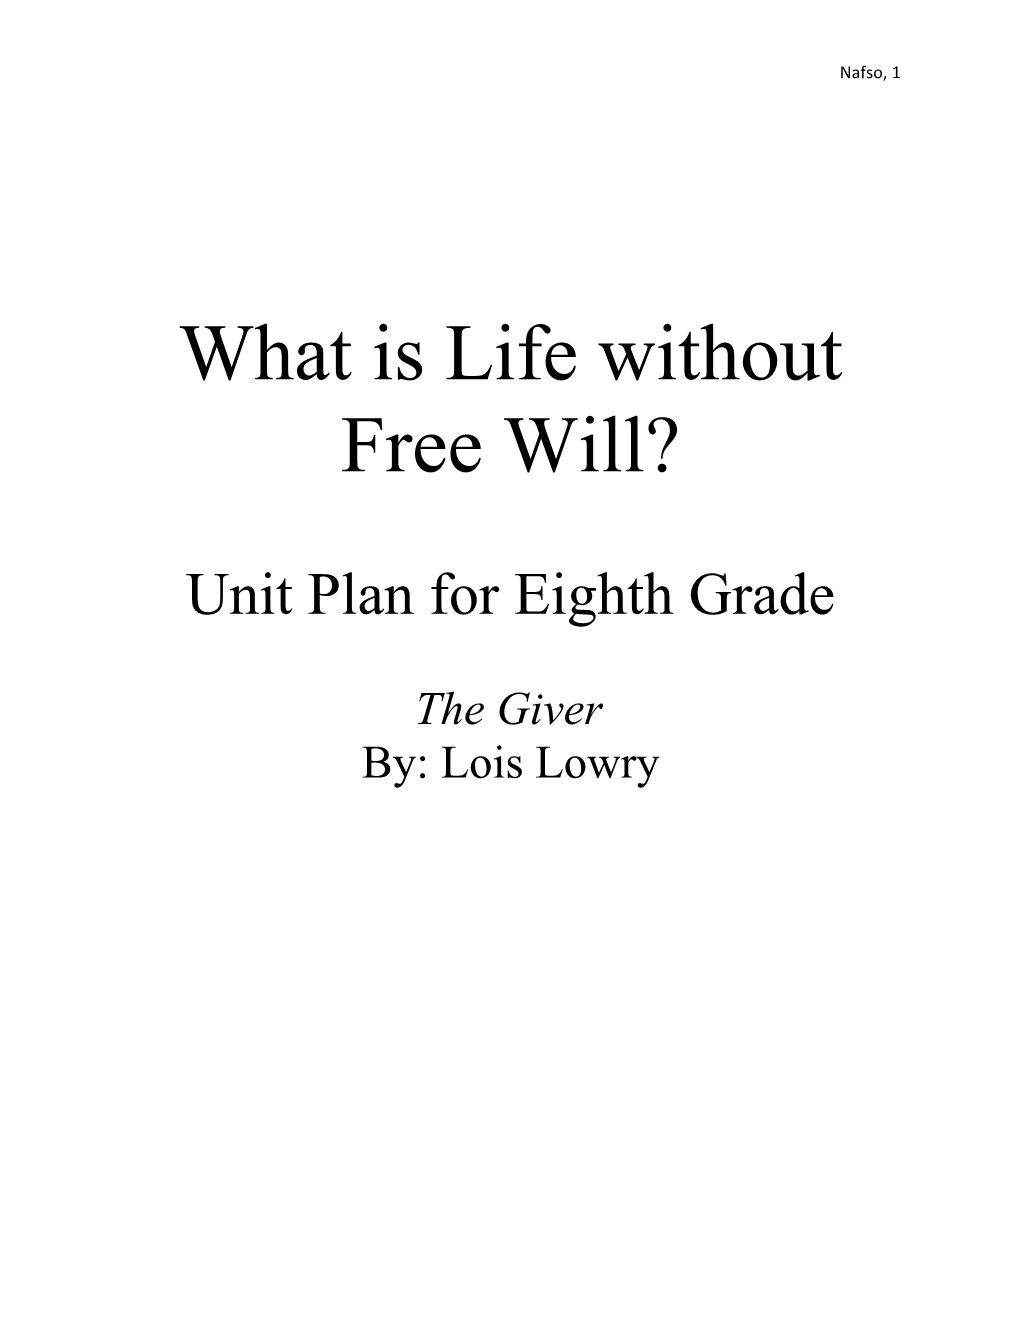 What Is Life Without Free Will?